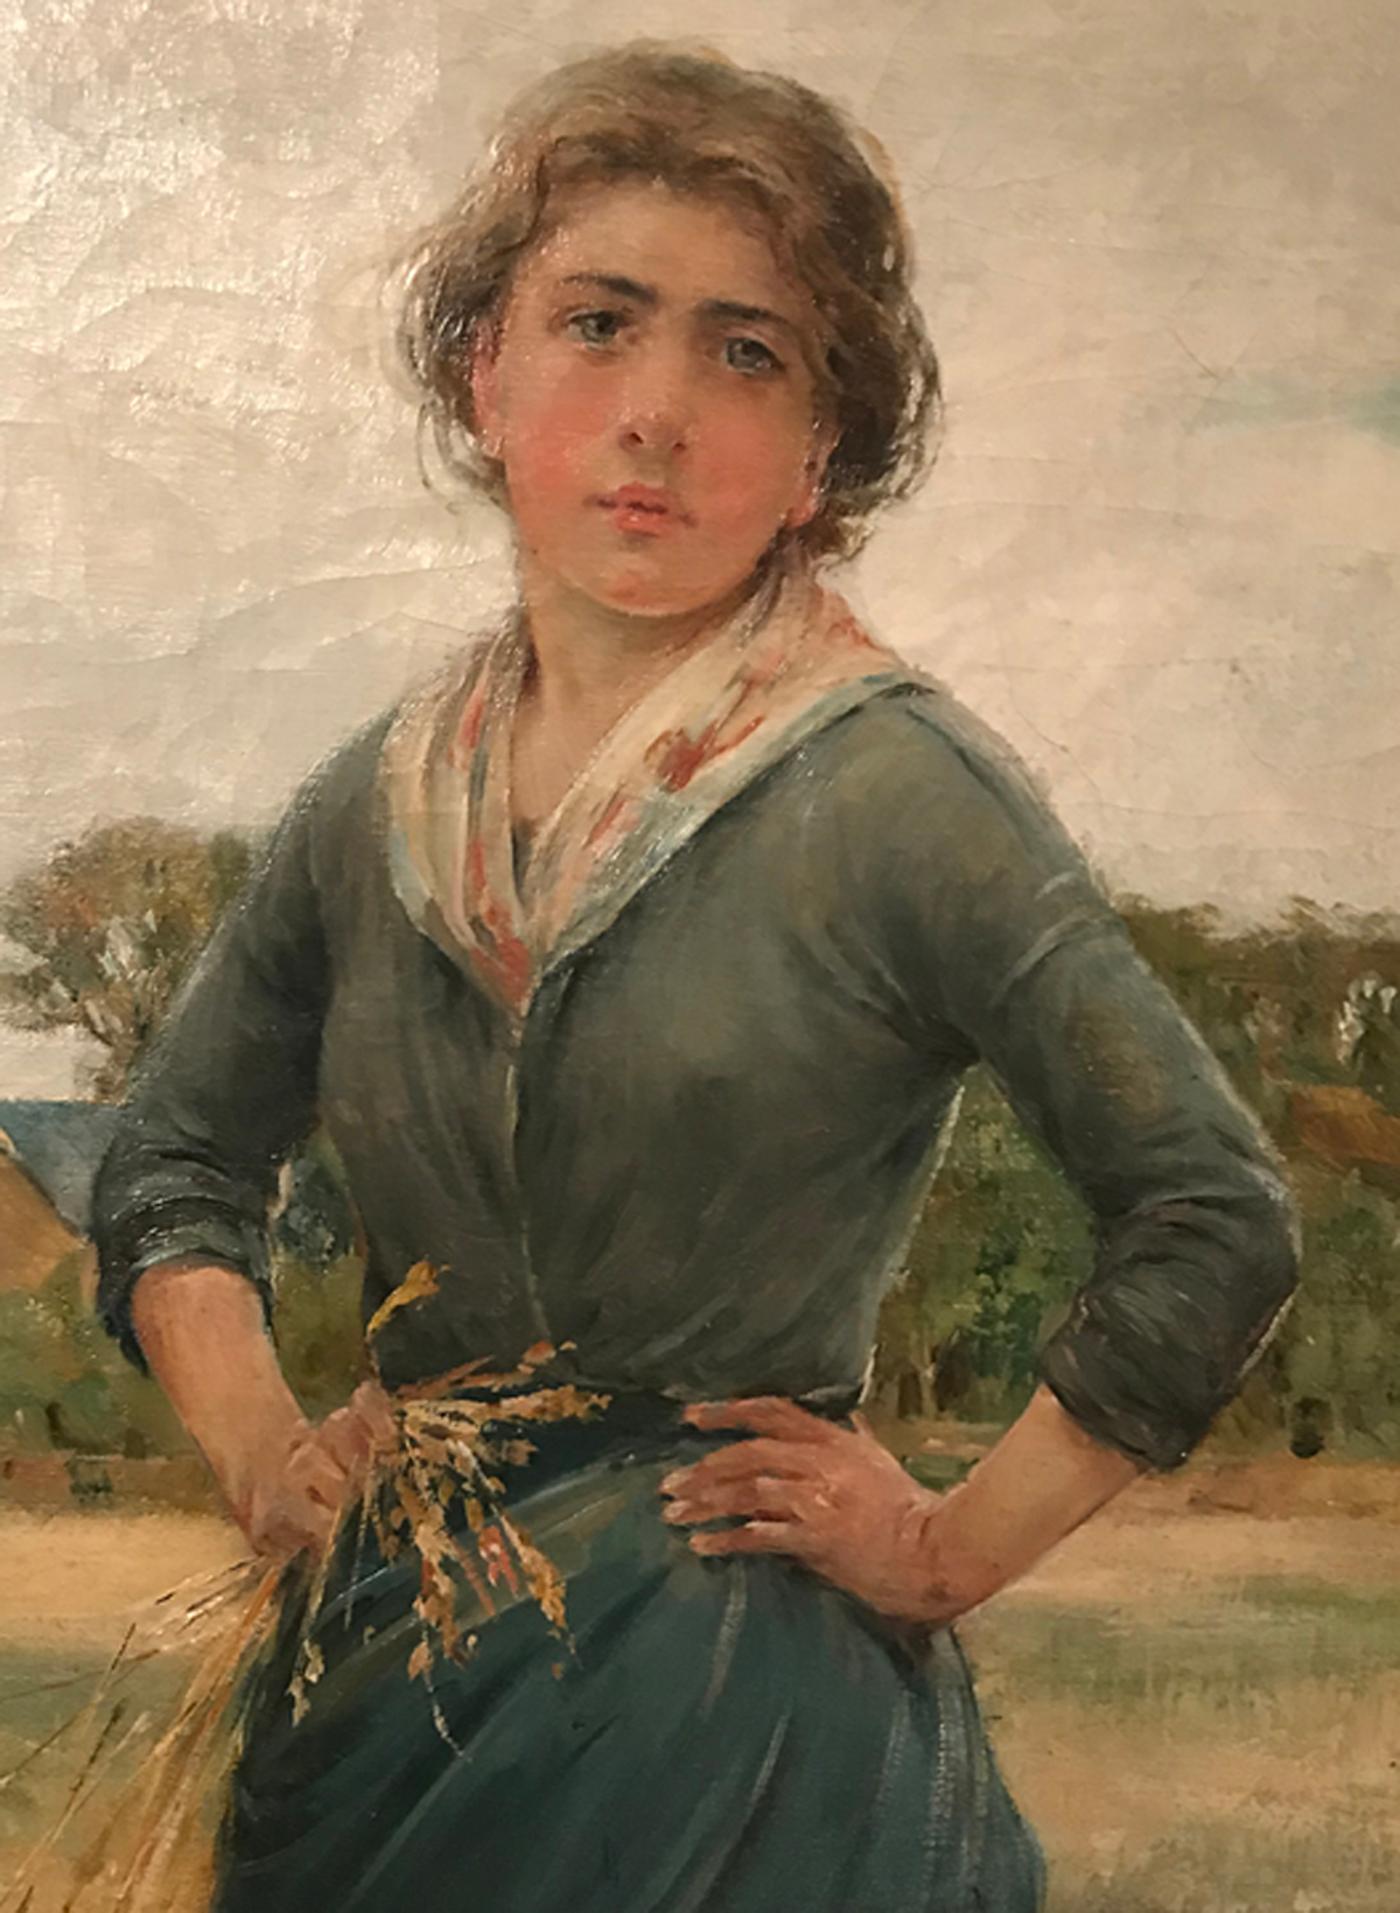 Woman in a Field - Painting by Henry Bacon